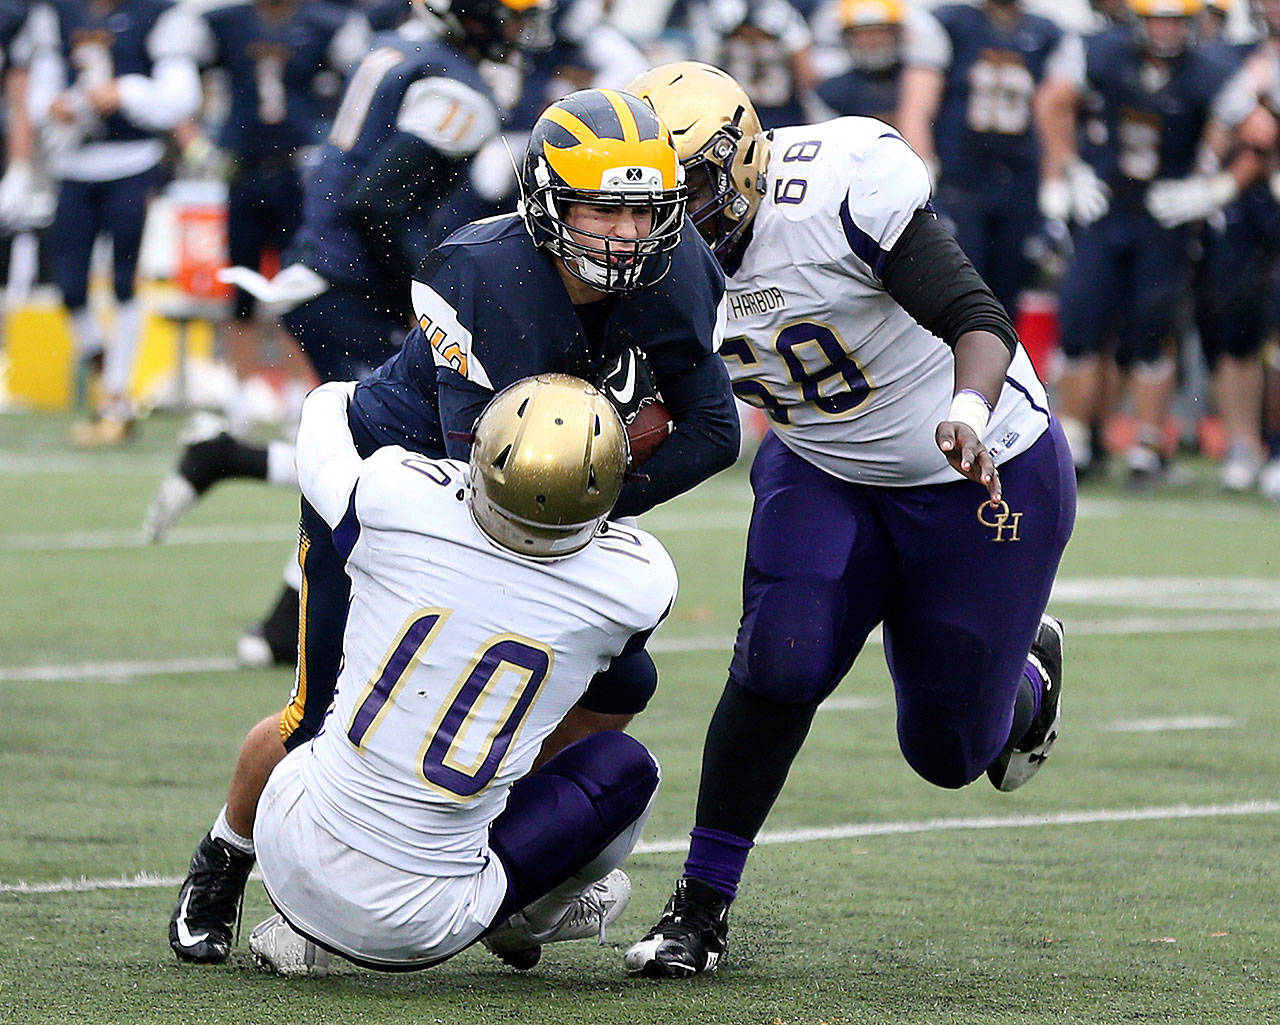 Left: In last year’s state playoffs, Mac Carr brings down a Bellevue ball carrier as De’Andre Bennett closes in. The WIAA will use committees to seed the teams in this year’s state tournament. (Photo by John Fisken)